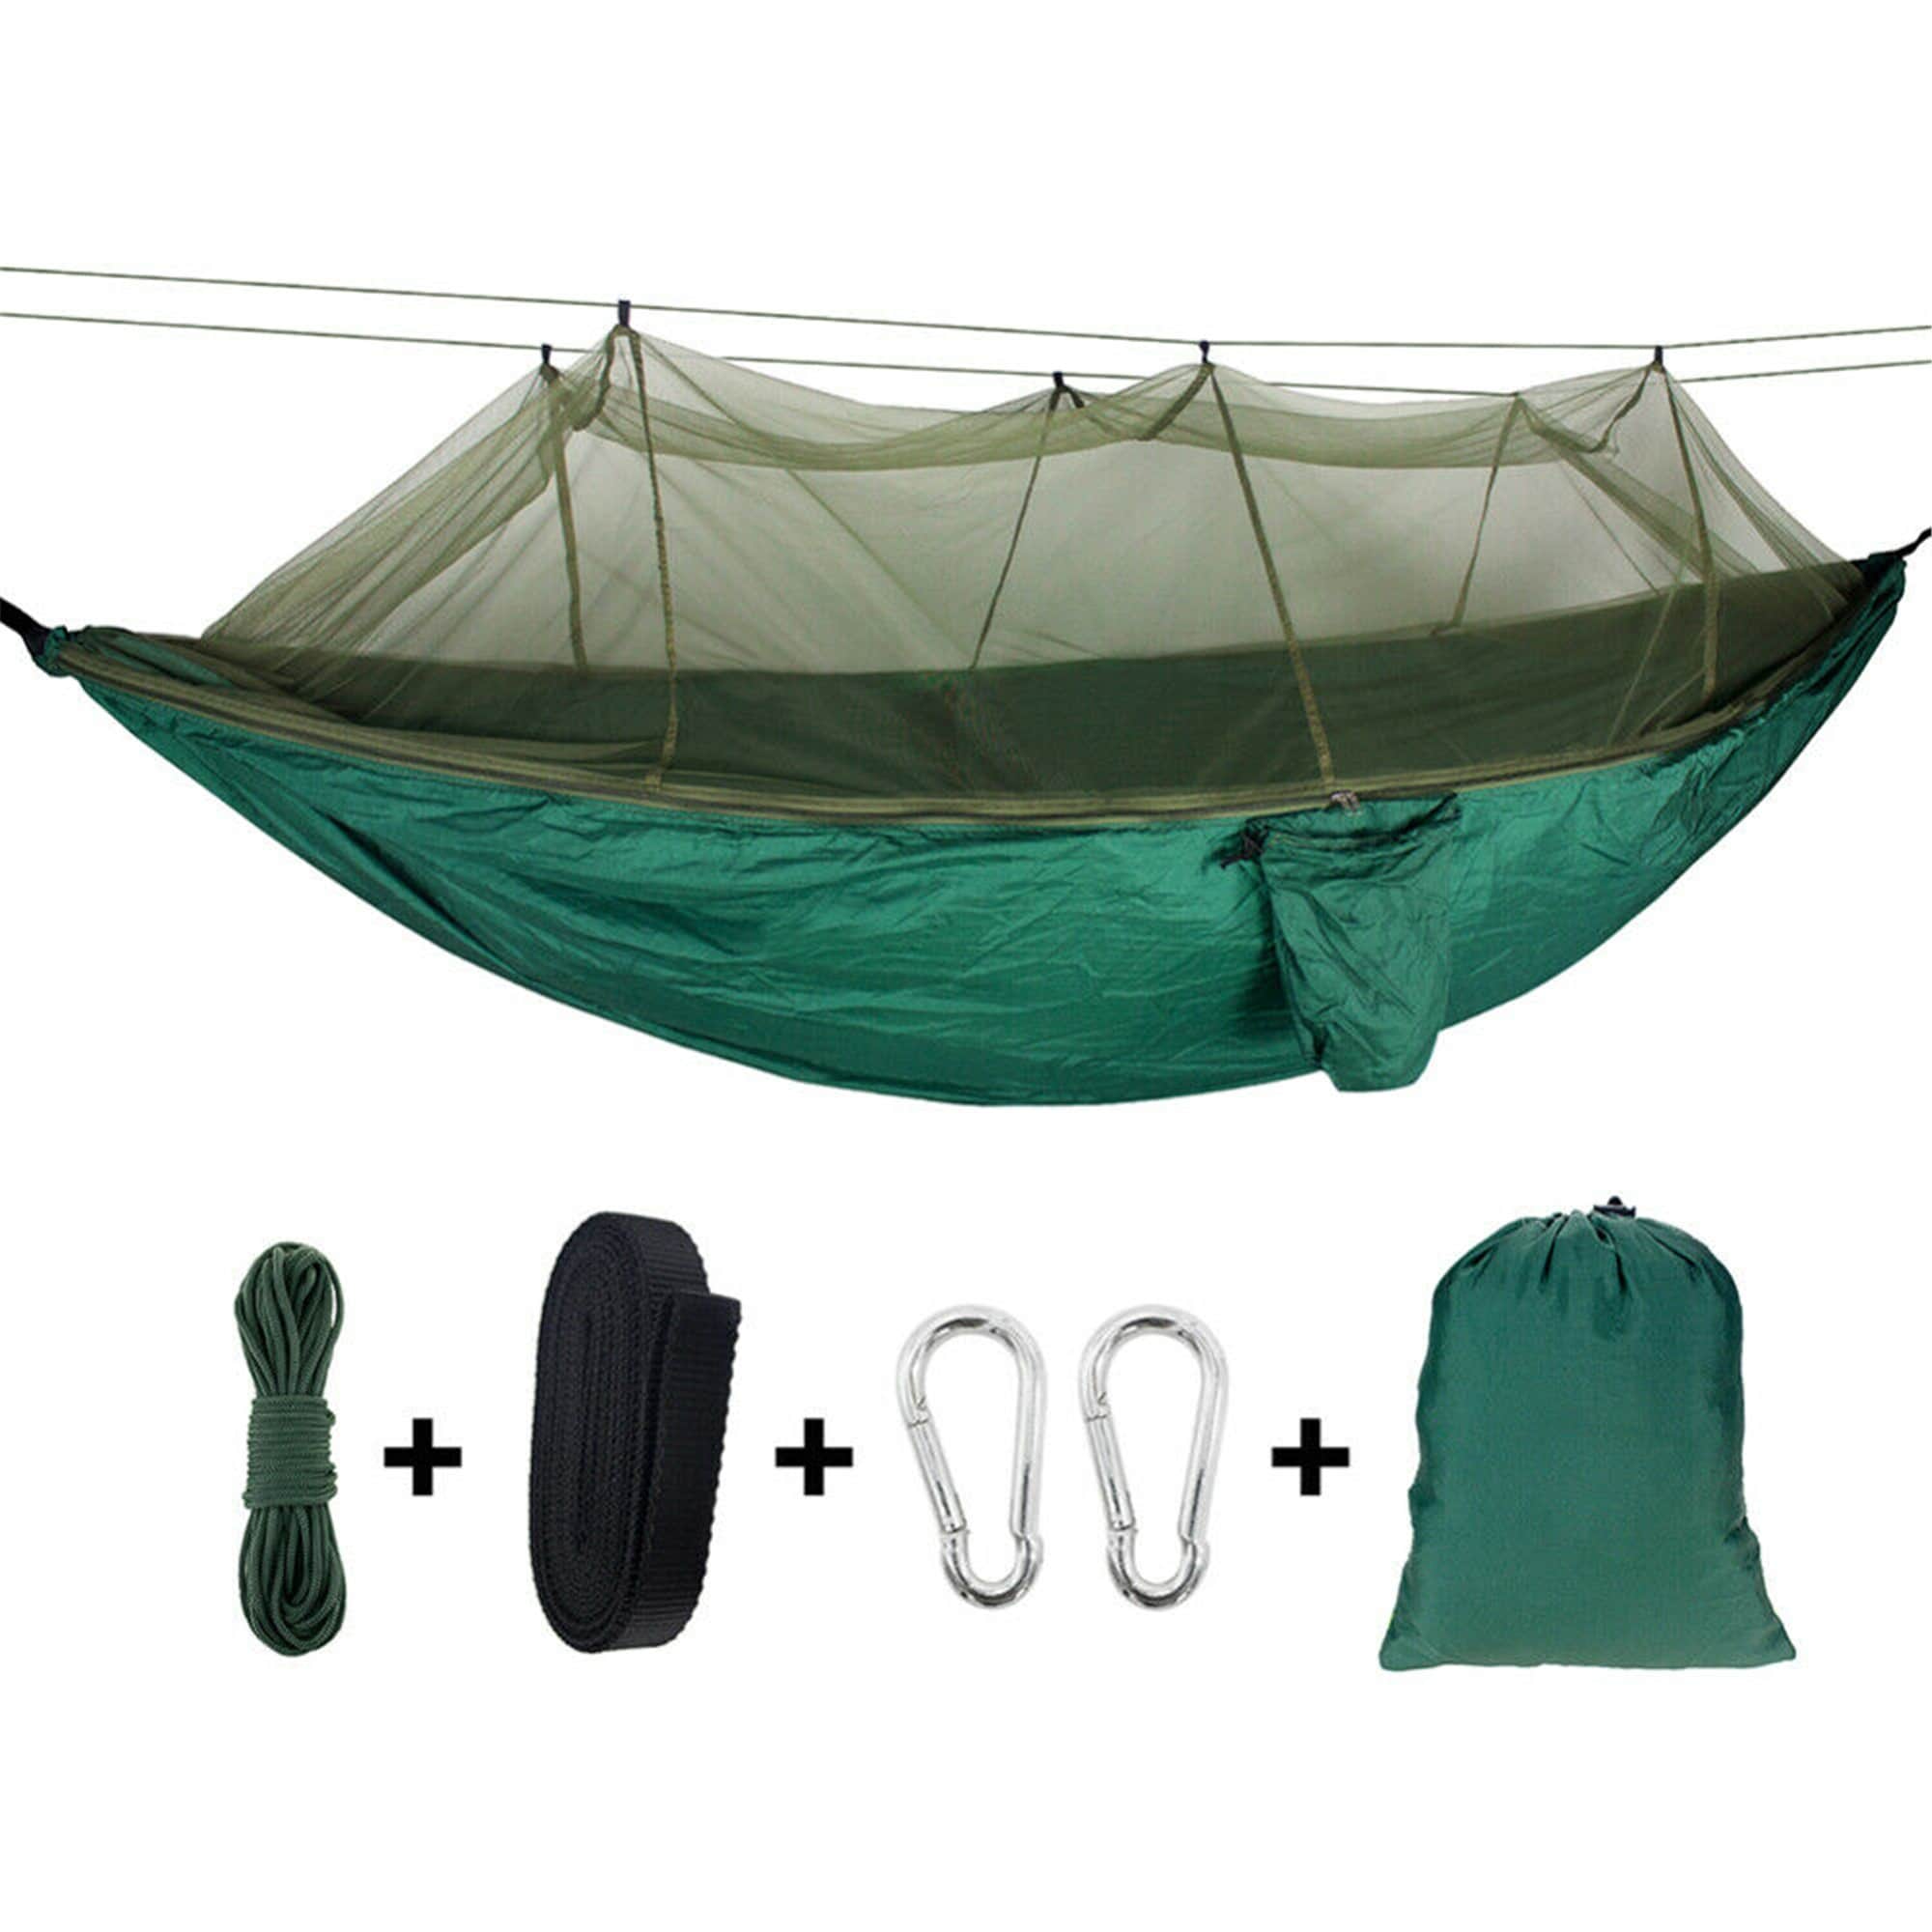 Camping Double Person Travel Outdoor Tent Hanging Hammock Bed With Mosquito Net 